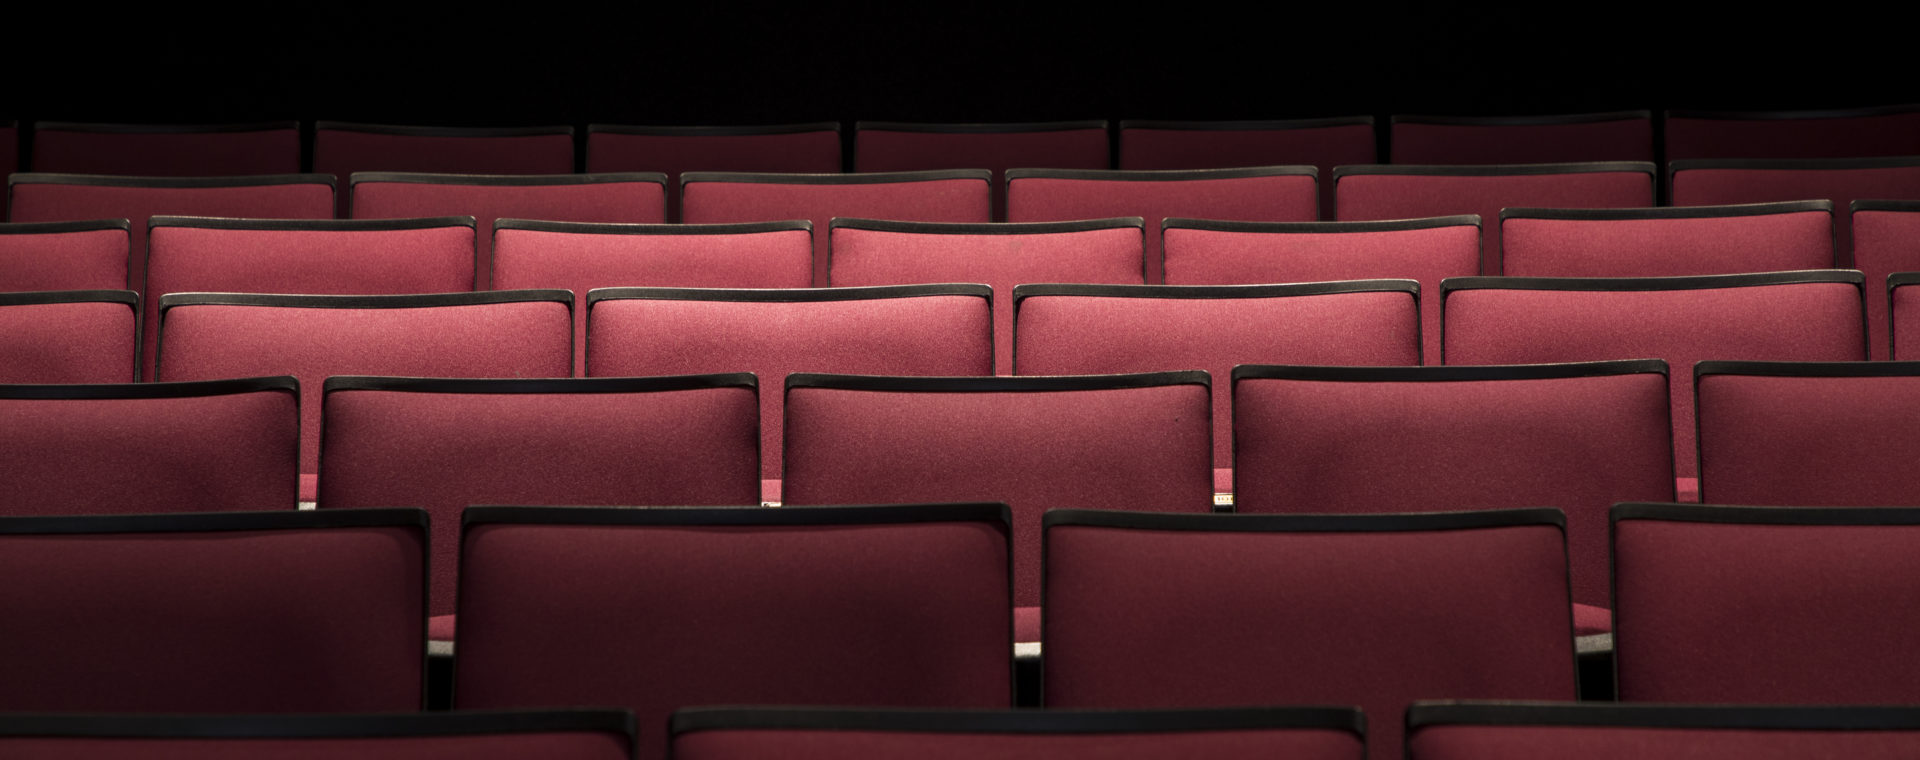 Performing Arts Center seats in the theater